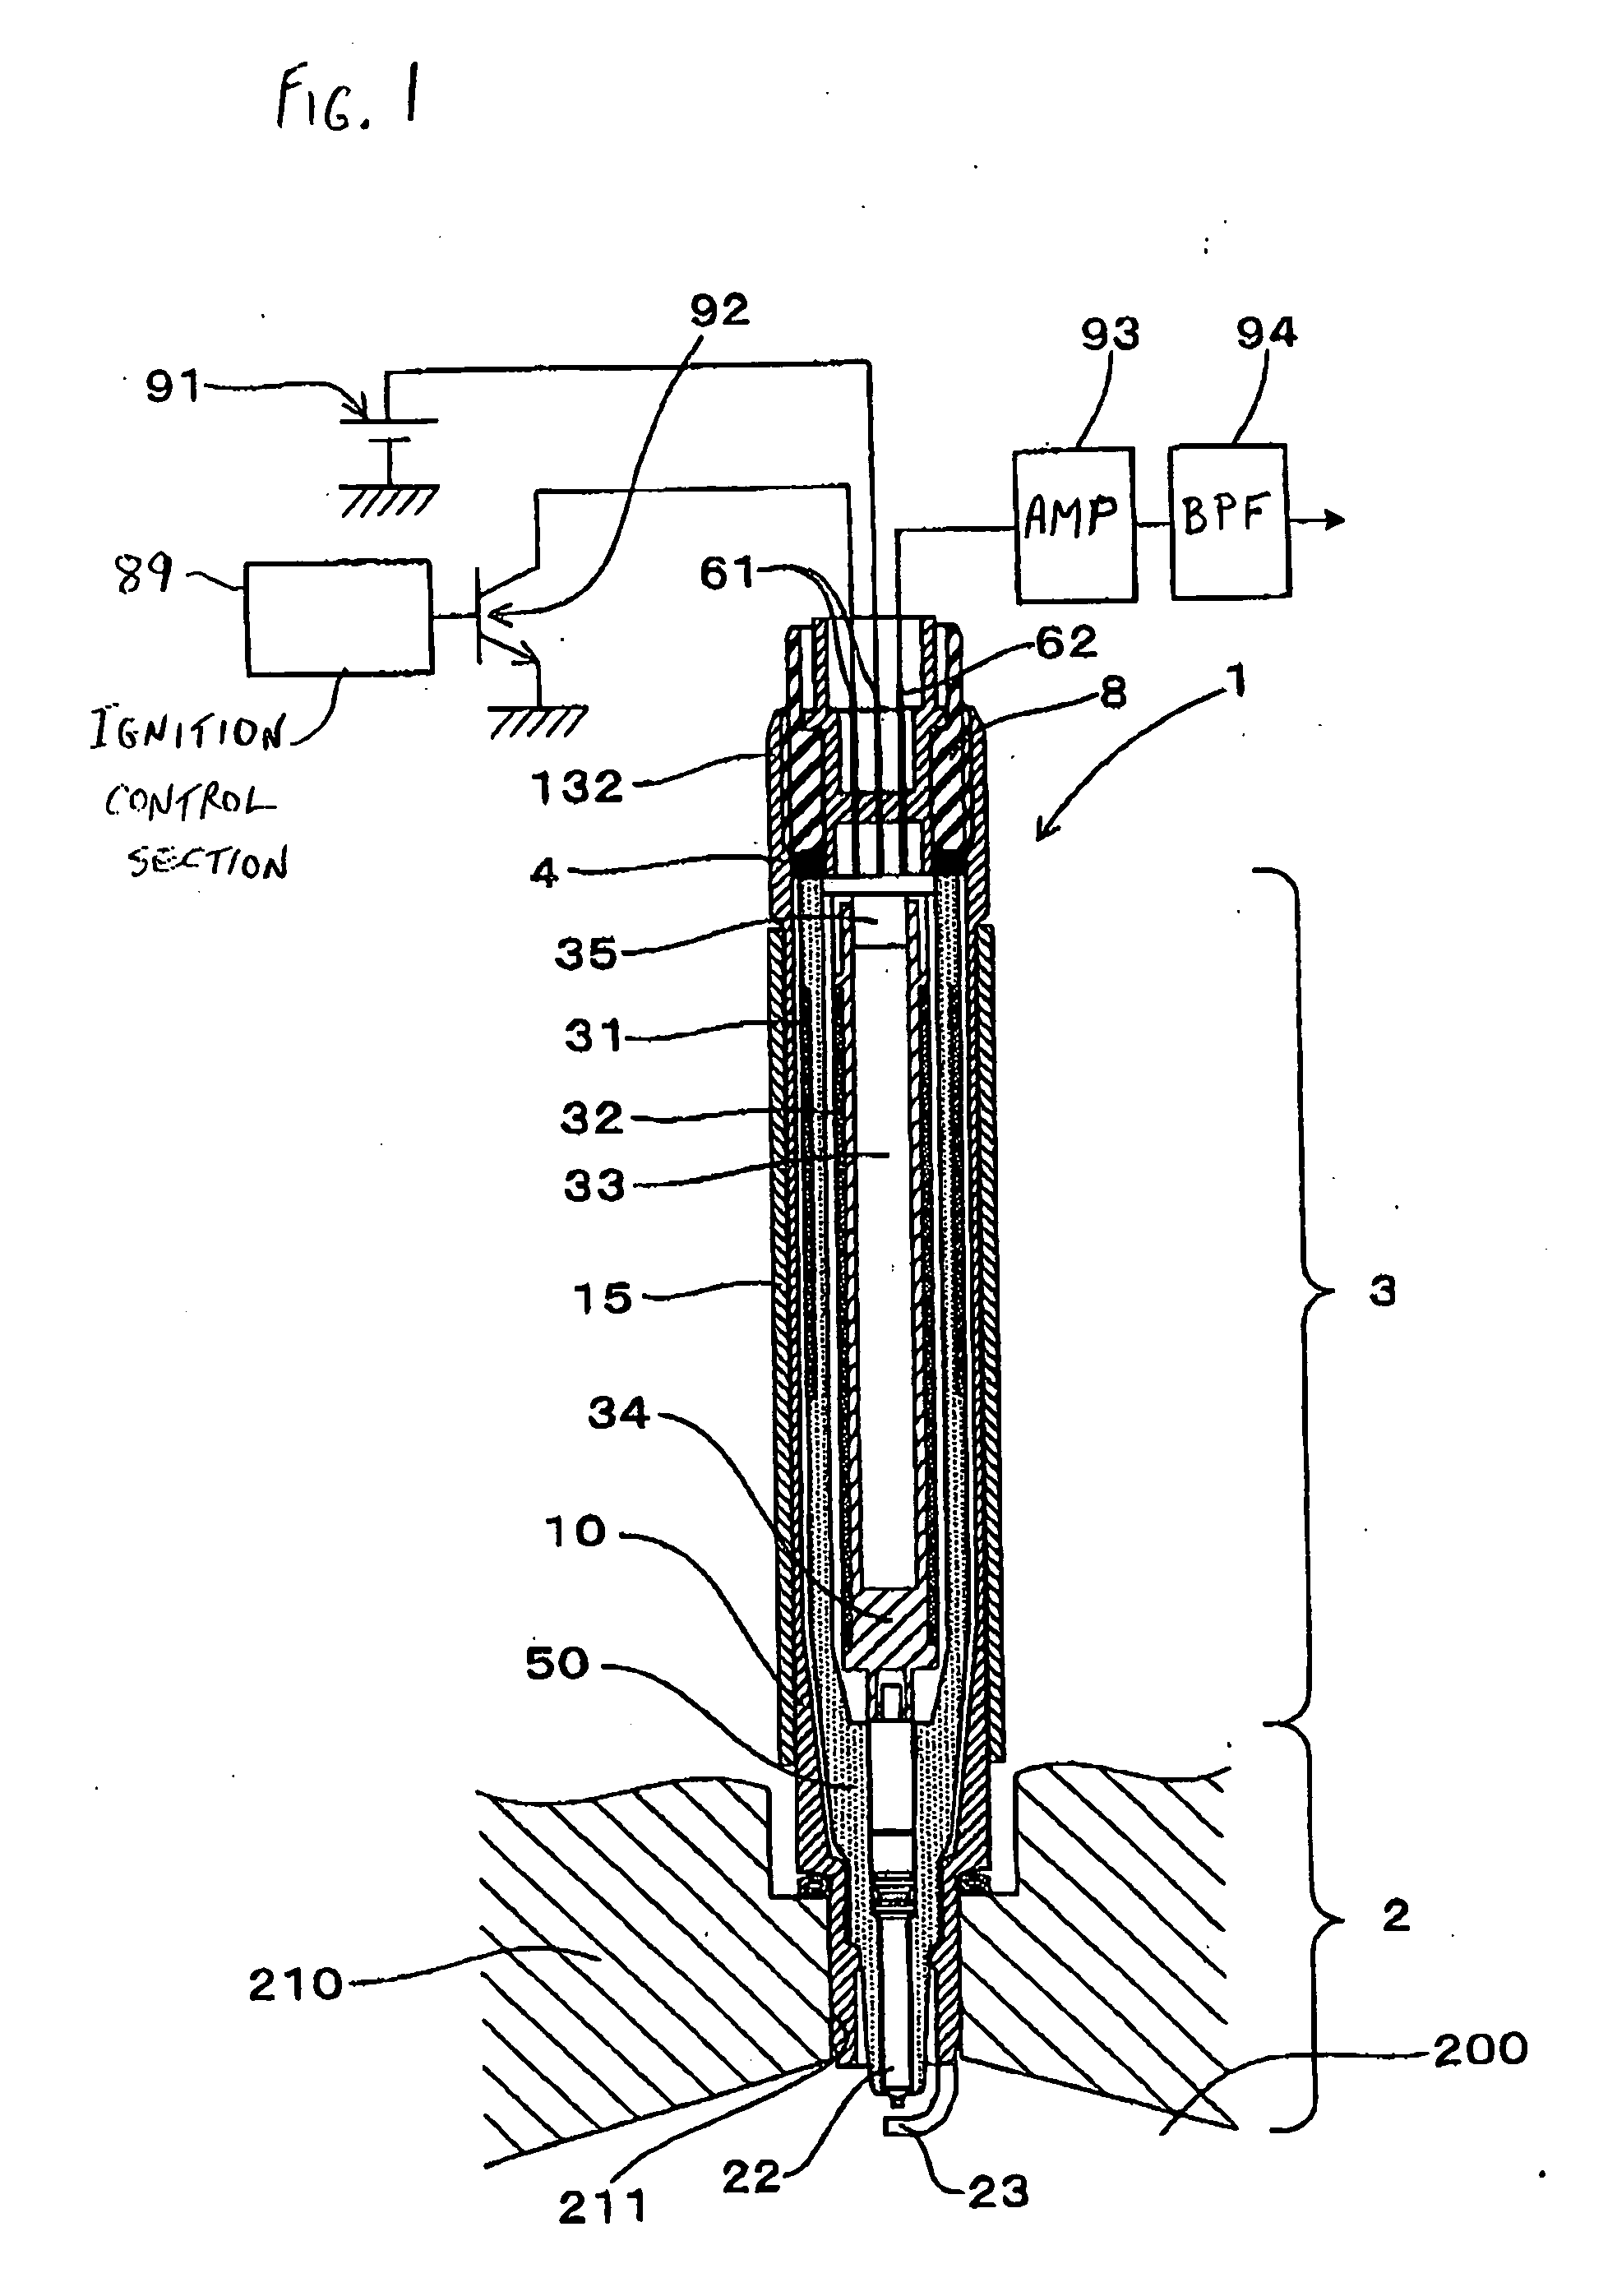 Combustion chamber pressure sensor equipped with damper body for attenuating transmitted engine vibration